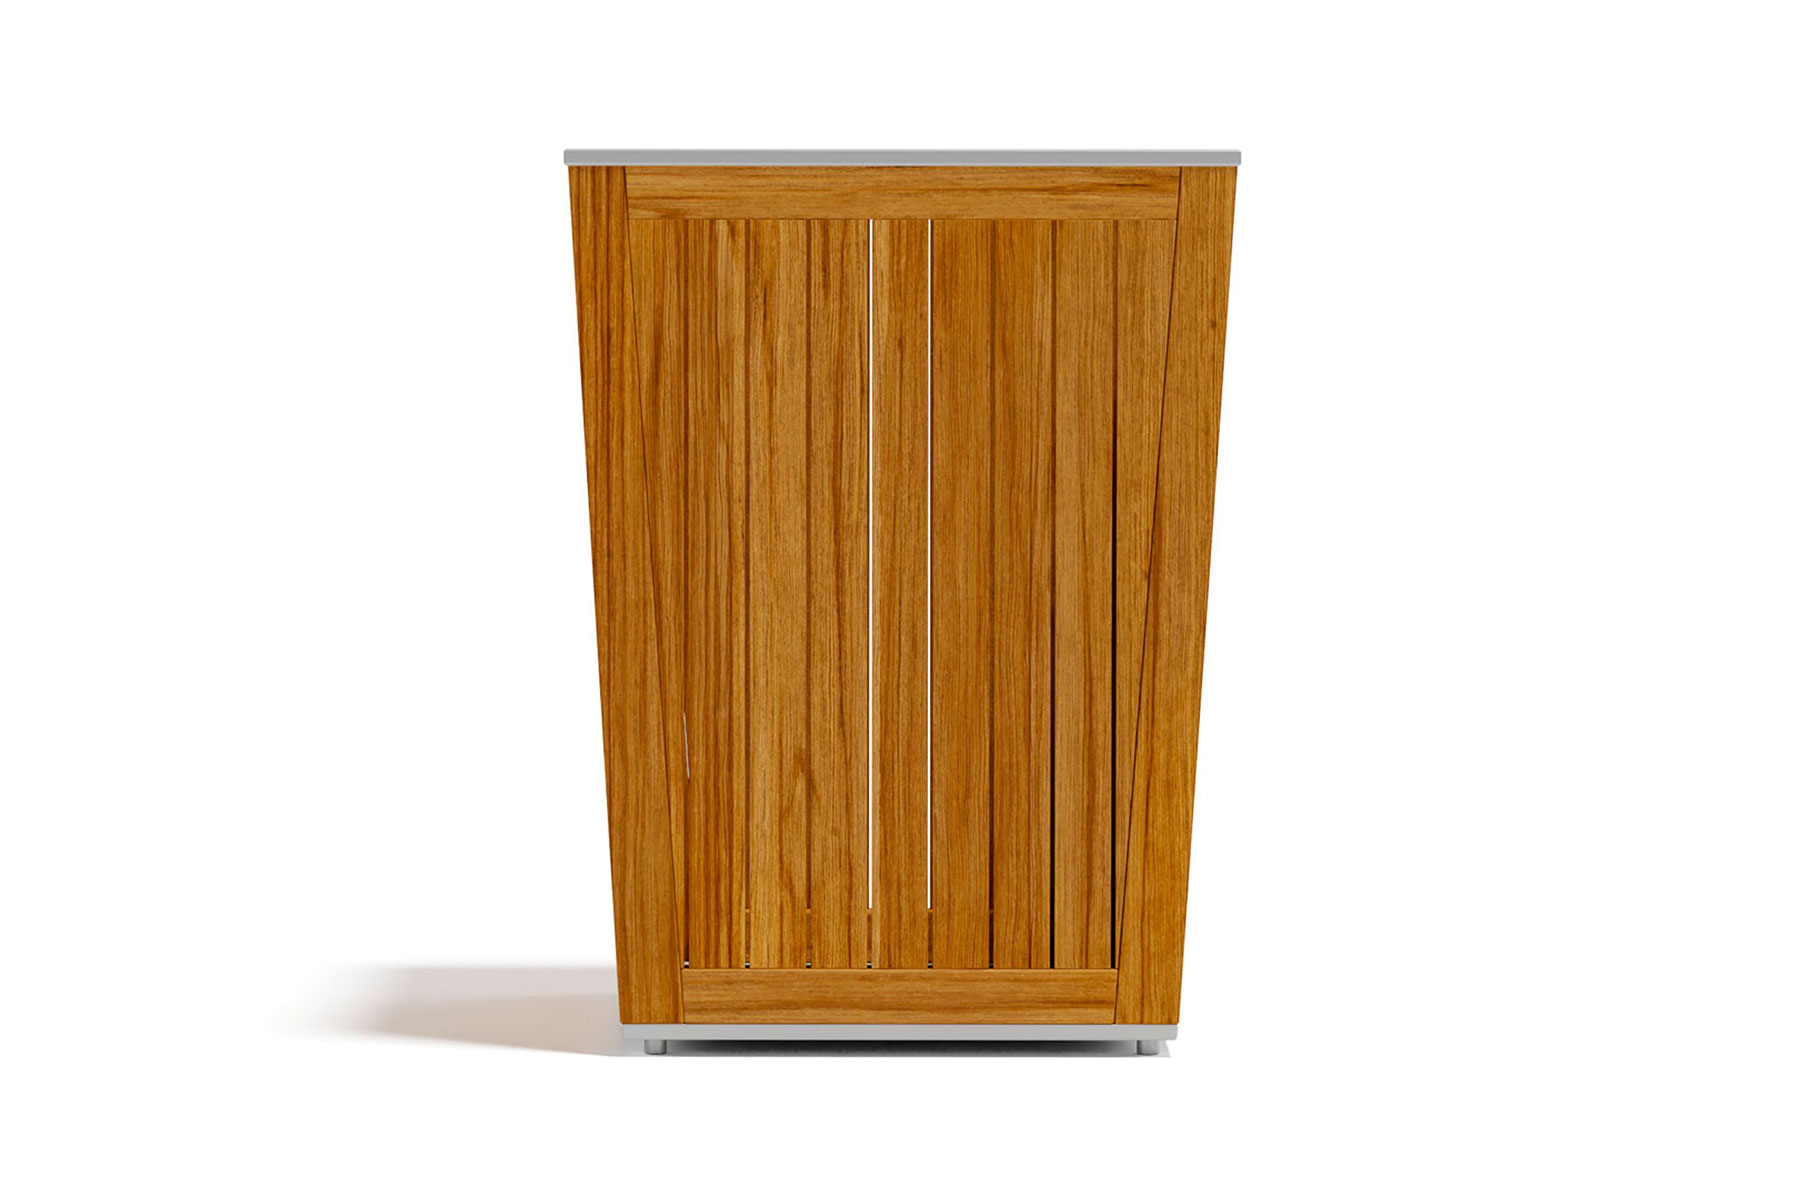 Cesto is an outdoor flower box made of pure Indonesian teak wood. Shop our selection of outdoor planter boxes ideal to create a perfect balance of design, elegance and durability.